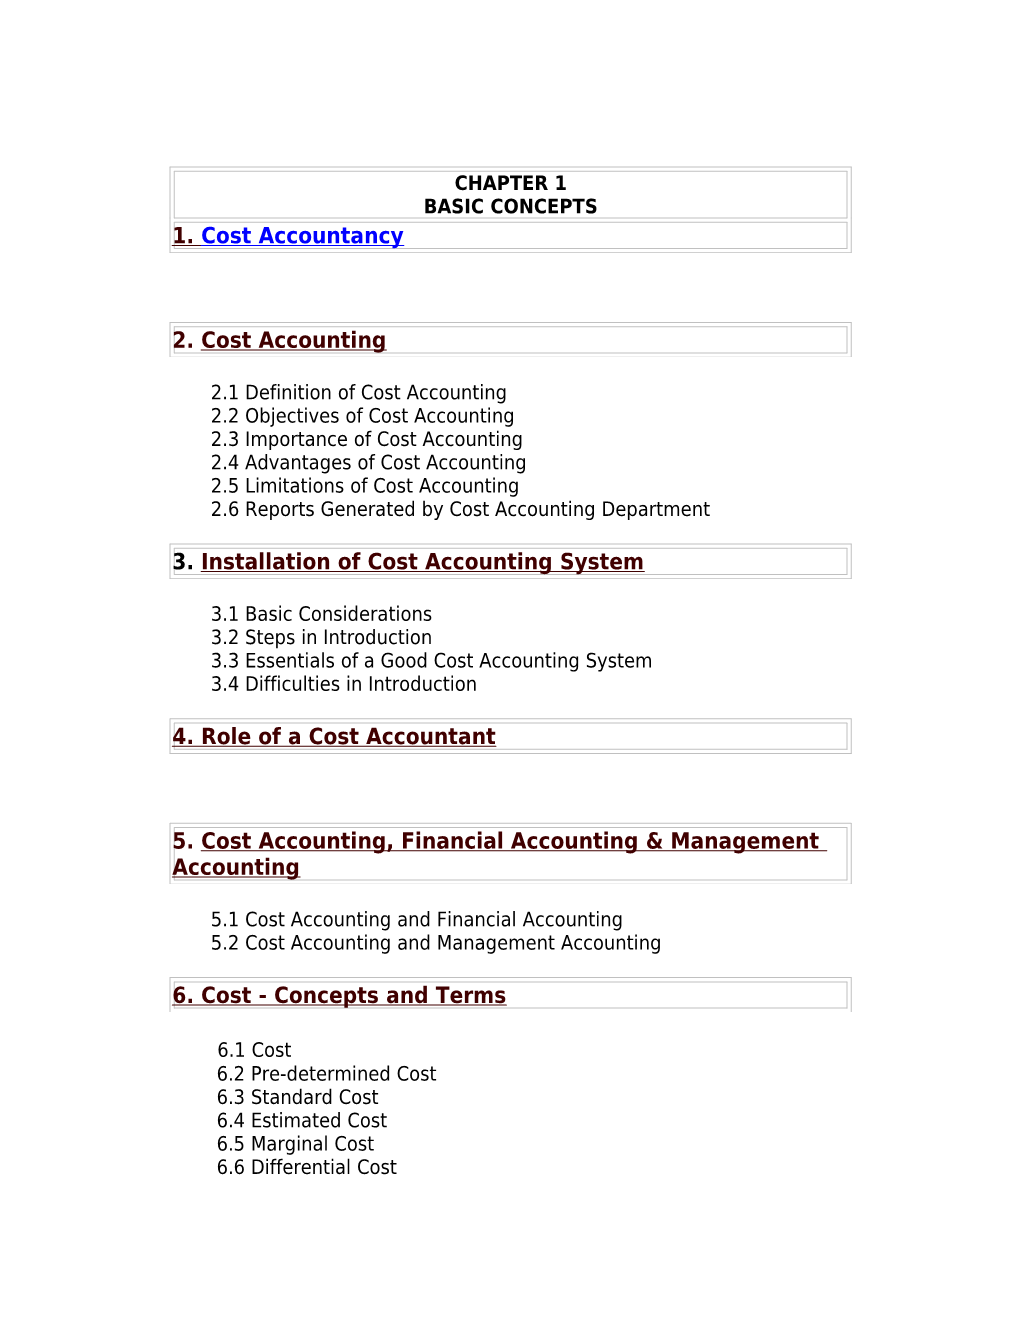 2.1 Definition of Cost Accounting 2.2 Objectives of Cost Accounting 2.3 Importance of Cost